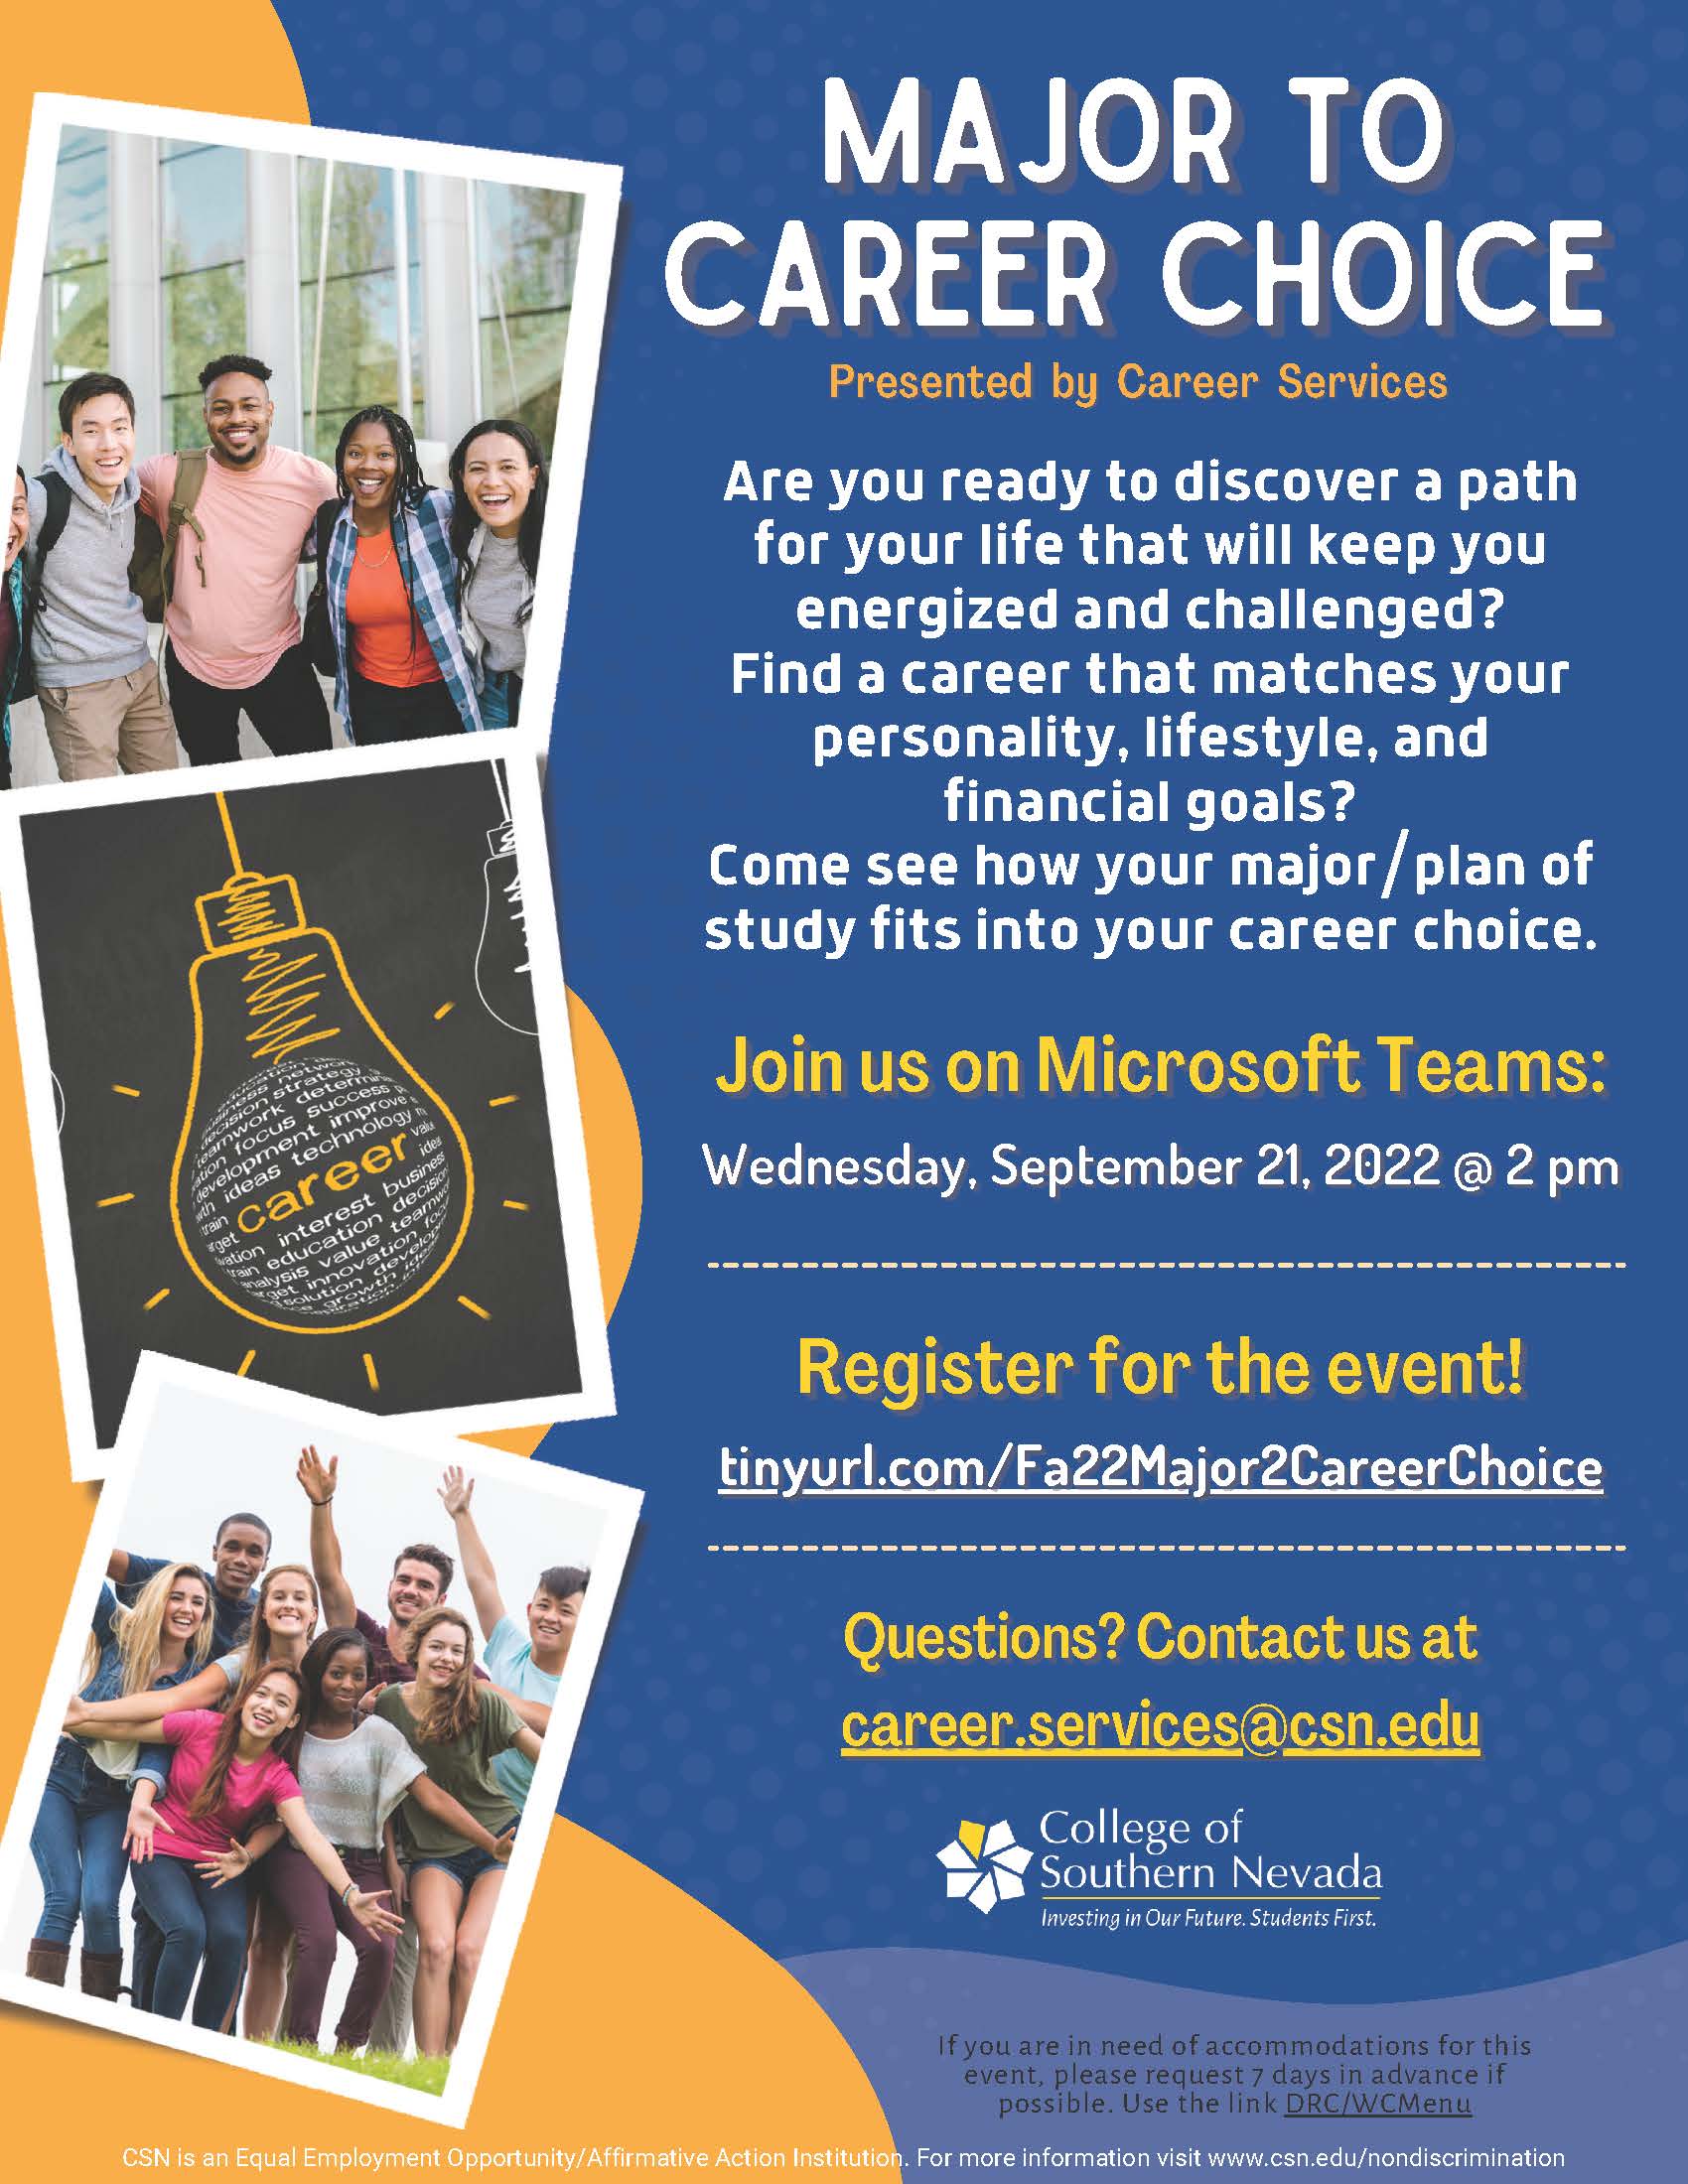 Come see how your major/plan of study fits into your career choice.